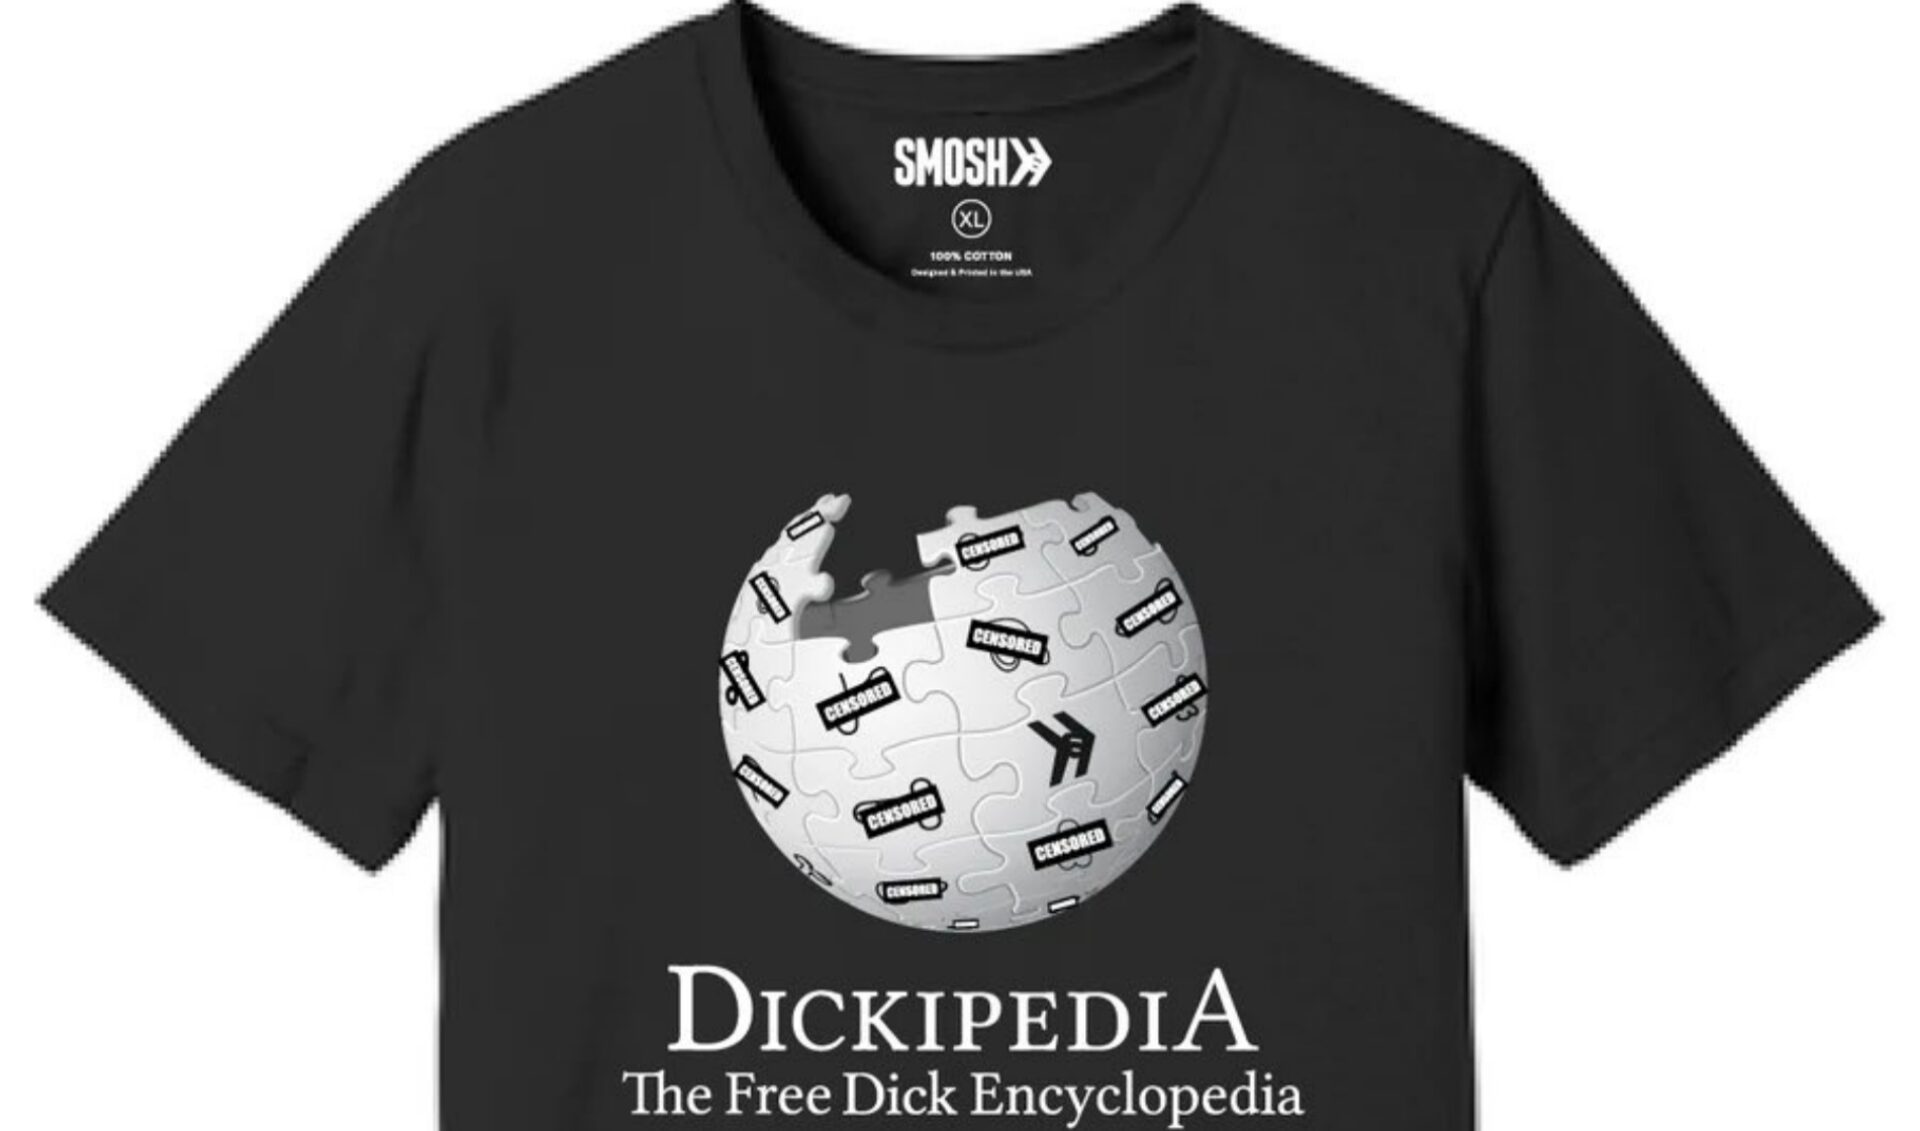 Smosh’s “Dickipedia” t-shirts are a response to Elon Musk’s comments about Wikipedia